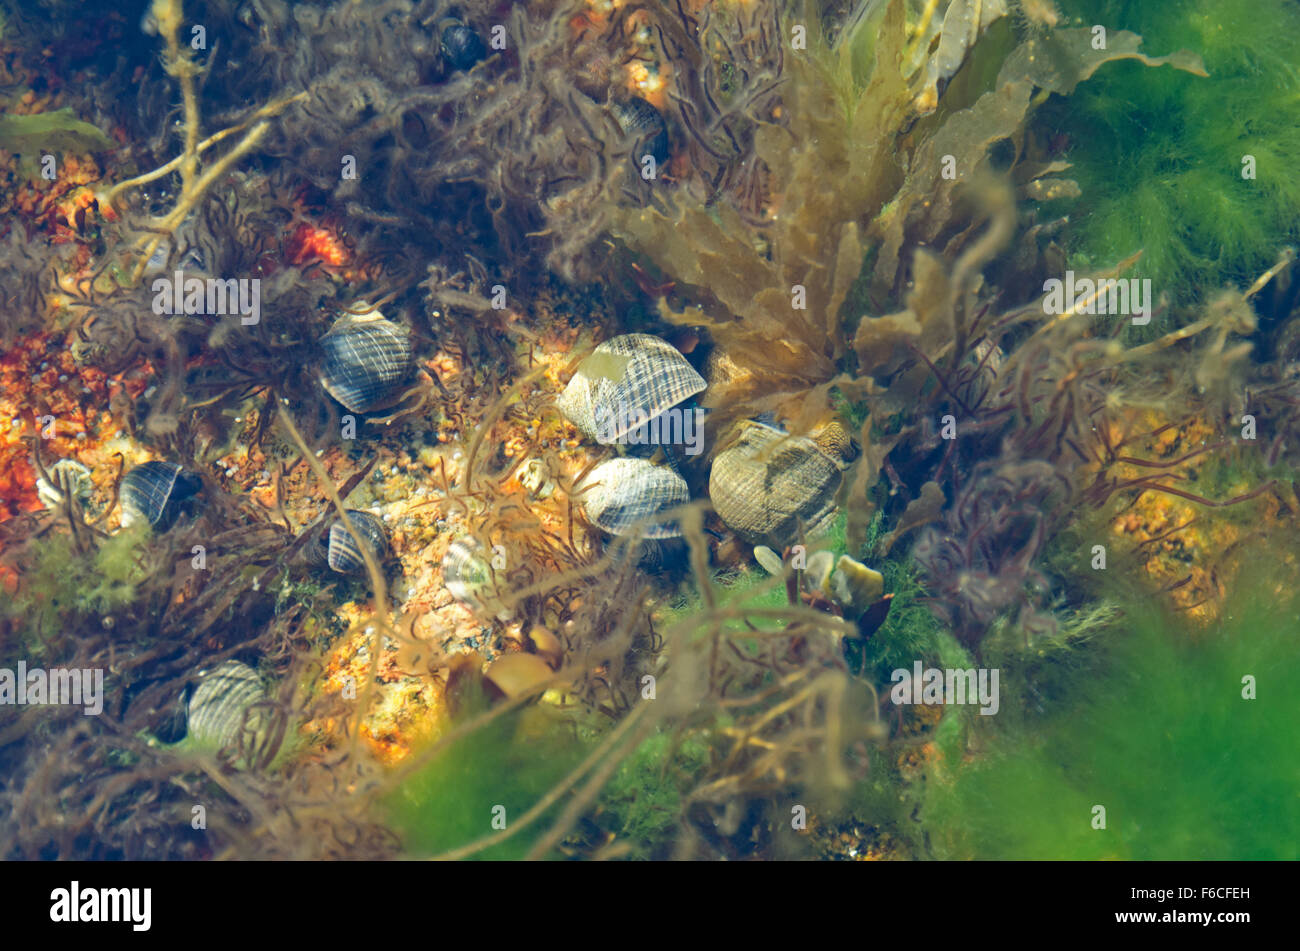 Common Periwinkle in a tide pool with Dumontia contorta and Acrosiphonia arcta, Otter Cove, Maine. Stock Photo